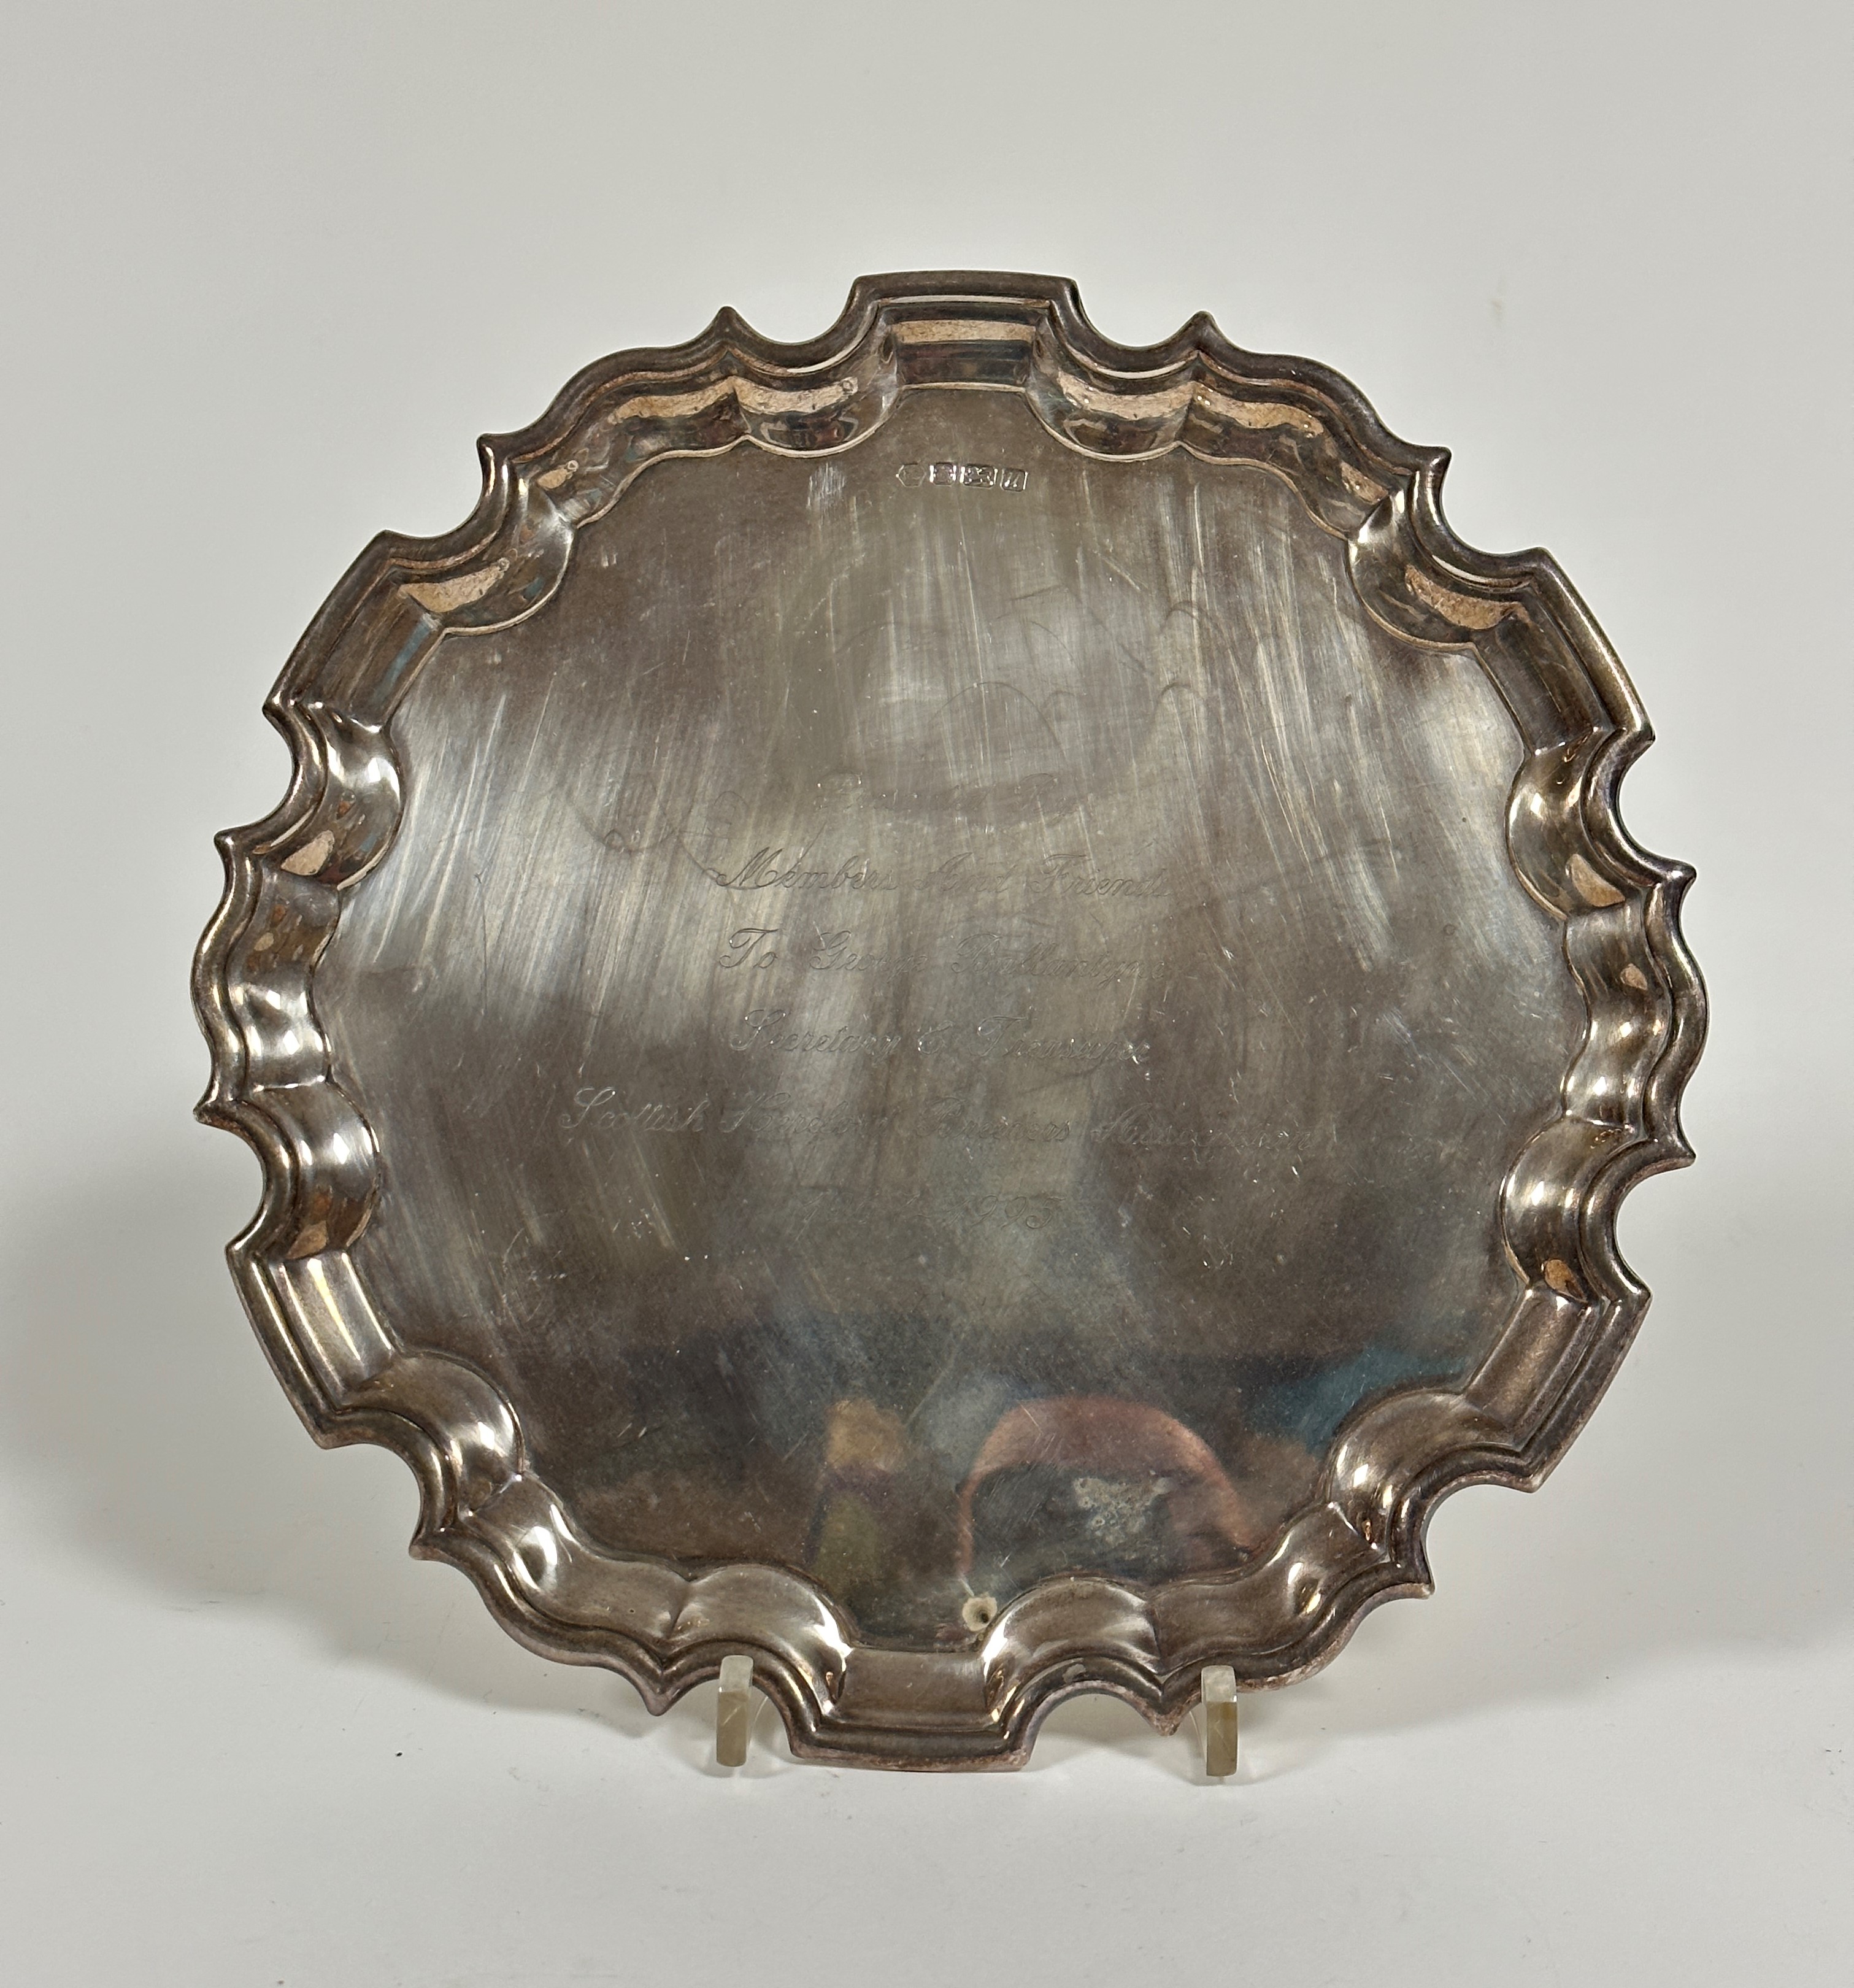 A modern silver scalloped waiter presented by Members and Friends to George Ballantyne, Secretary